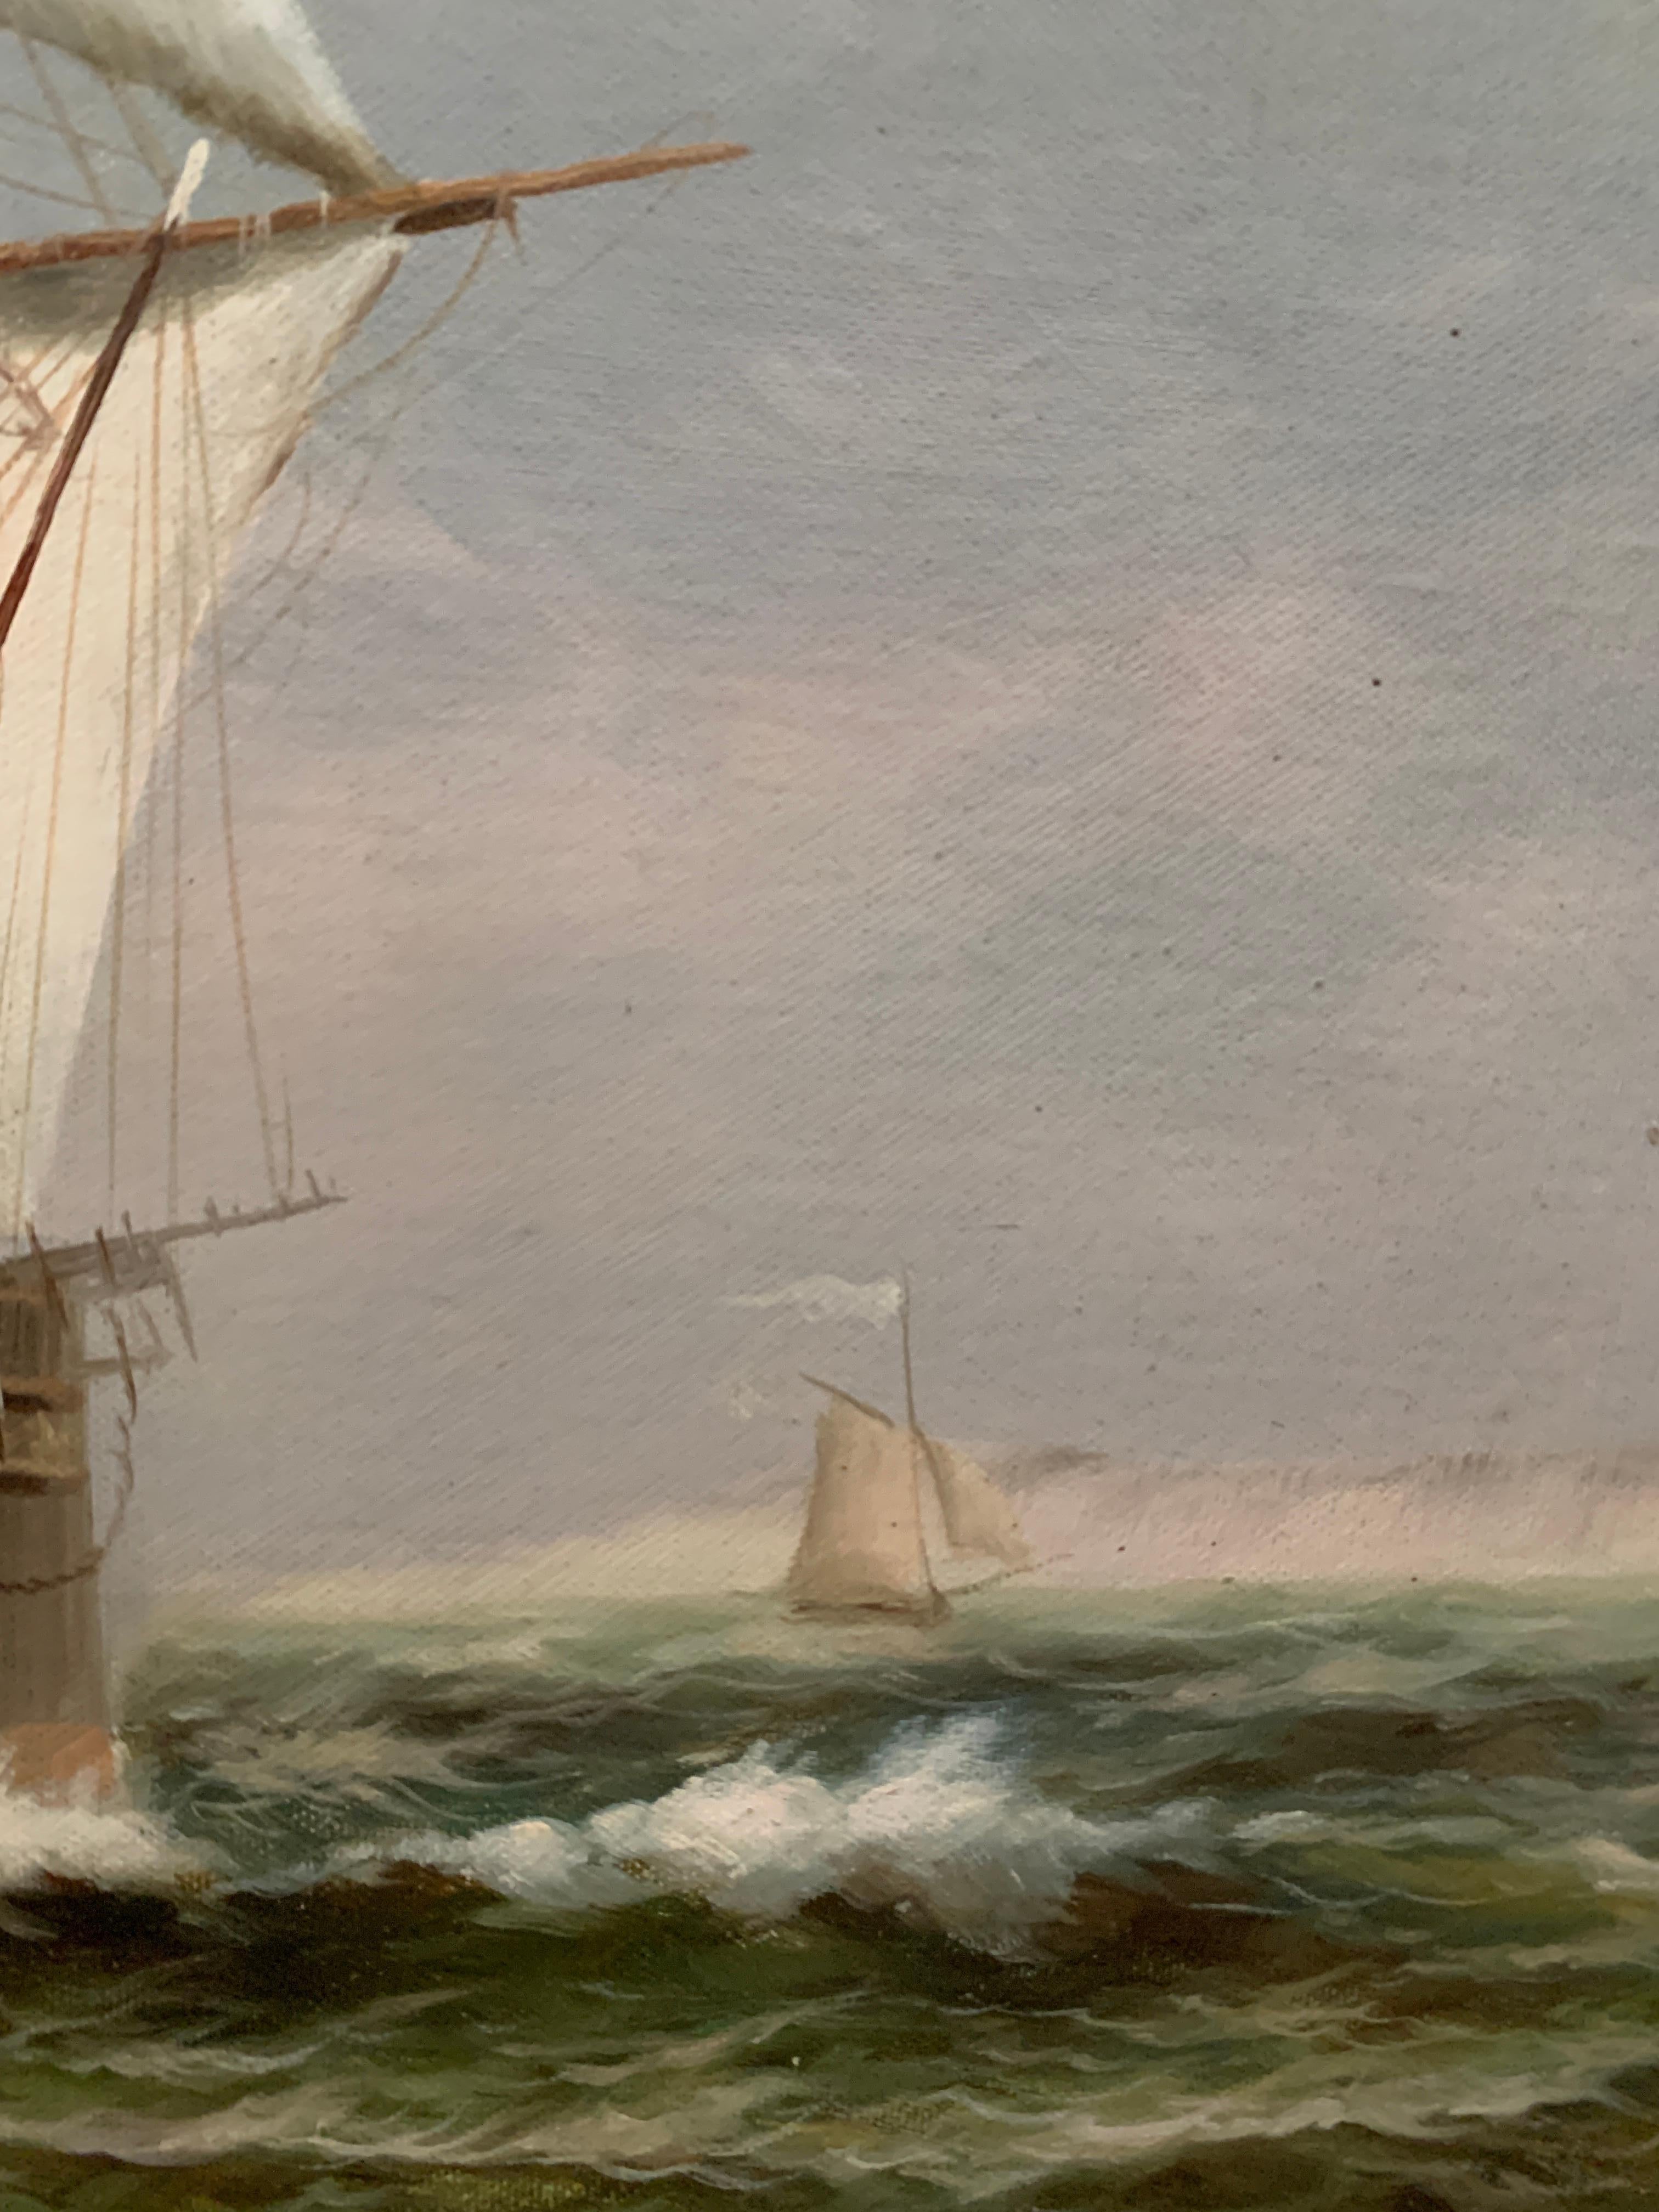 19th century style American tea clipper-sailboat at sea with a landscape beyond. 1